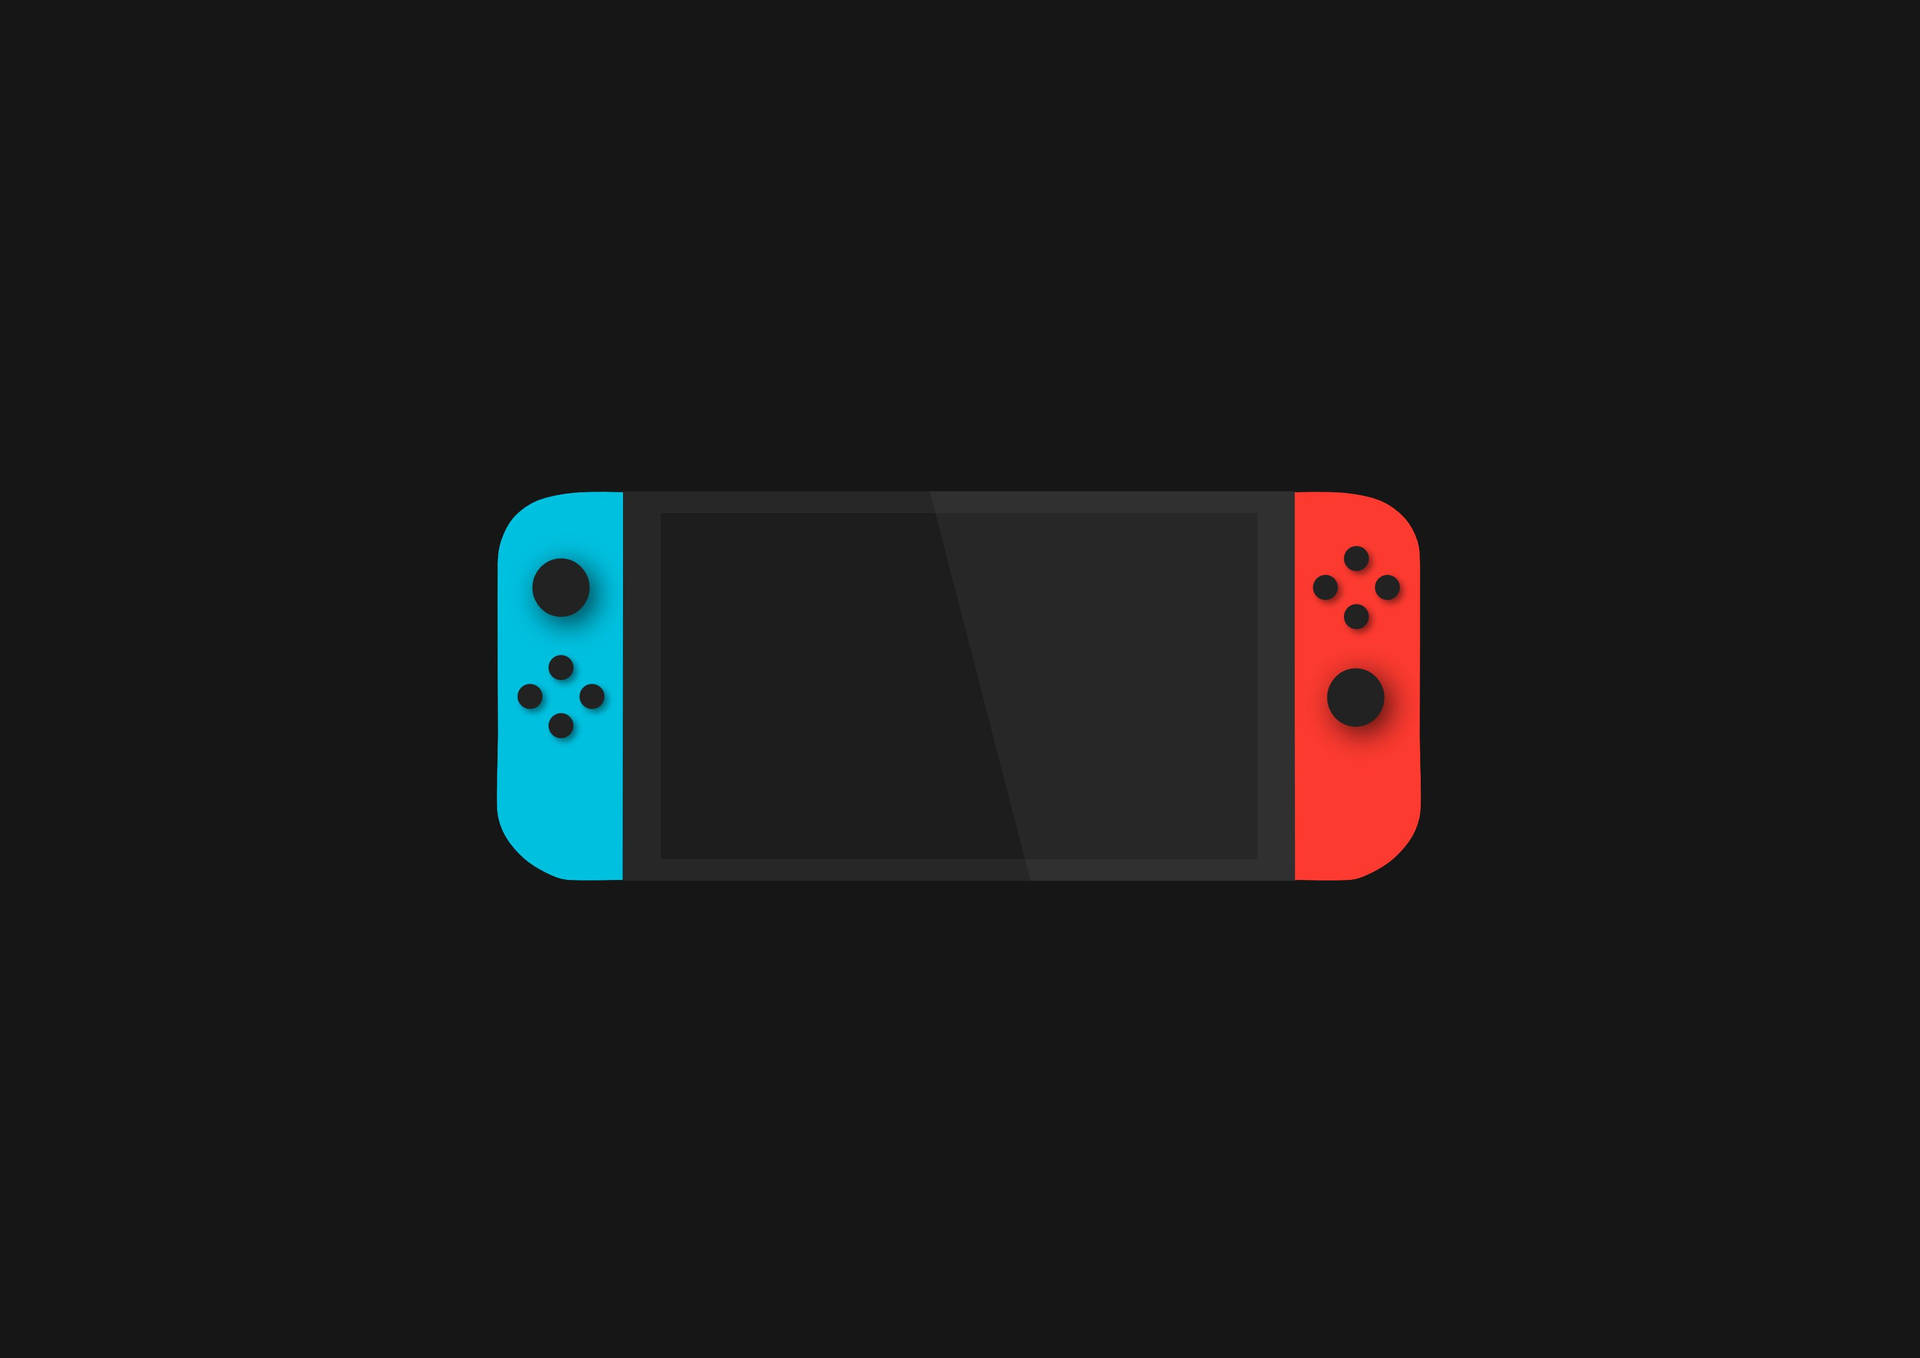 Experience immersive gaming on the Nintendo Switch Wallpaper